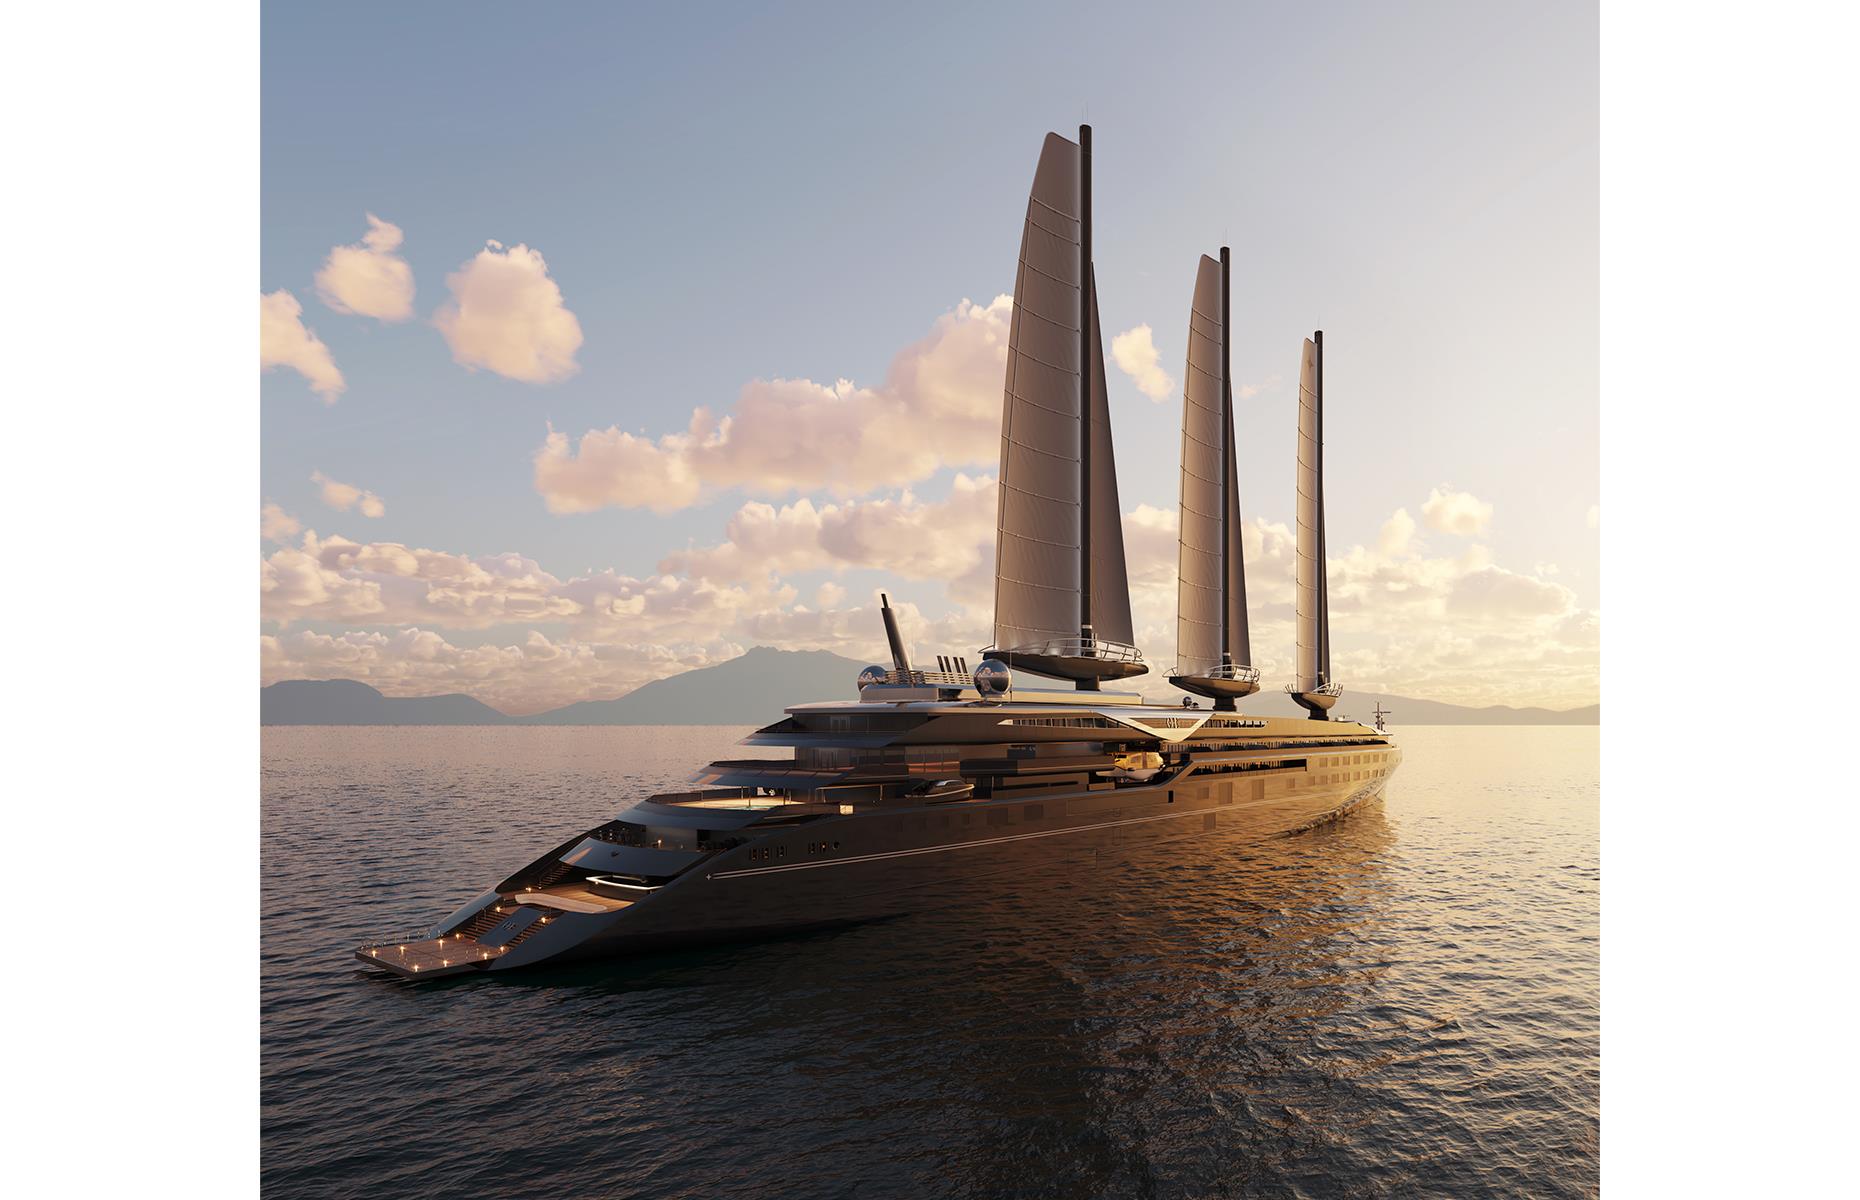 <p>After launching the world’s most luxurious train 140 years ago, <a href="https://www.orient-express.com">Orient Express</a> will launch an opulent ship to match. Orient Express Silenseas, which will take to the waves in 2026, will have 54 suites (including a 15,231-square-foot/1,415sqm Presidential Suite), two swimming pools, two restaurants and a speakeasy bar. Oh, and a recording studio. Prices are to be confirmed (but will inevitably be eye-watering).</p>